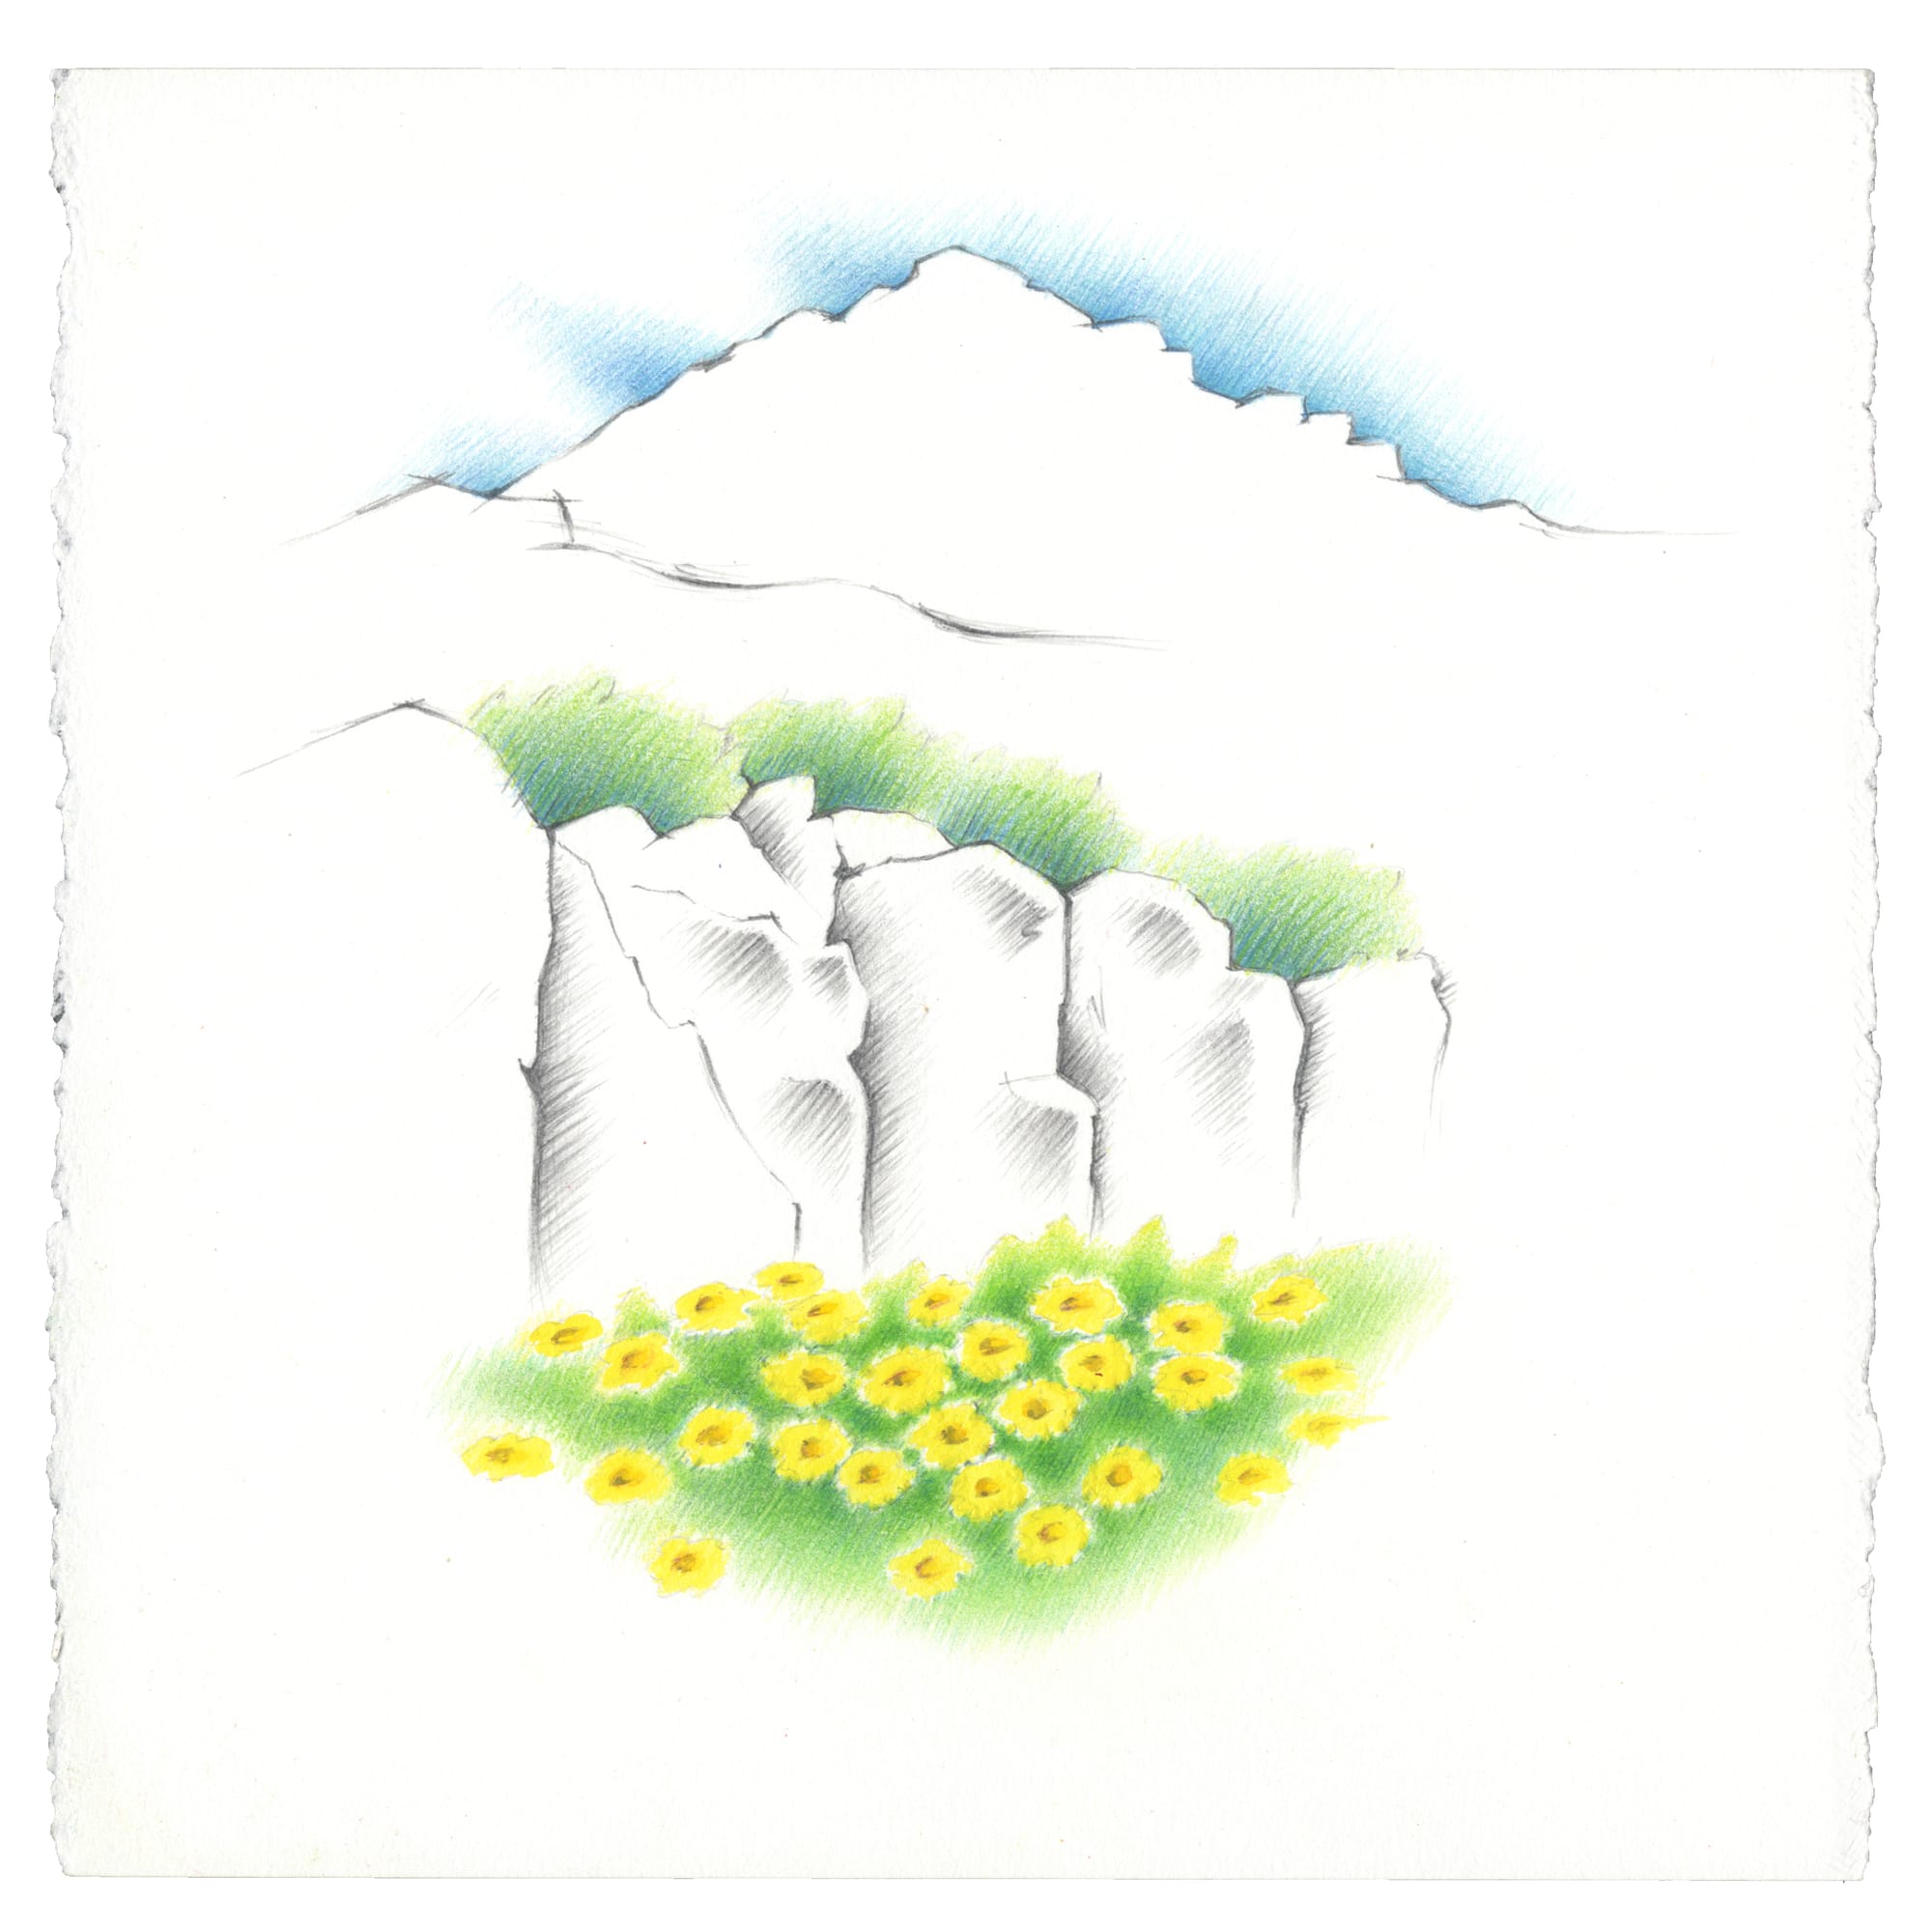 Image of painting of yellow balsamroot on green grass against upright rocks in foreground, with green bushes and then a butte against a blue sky in background